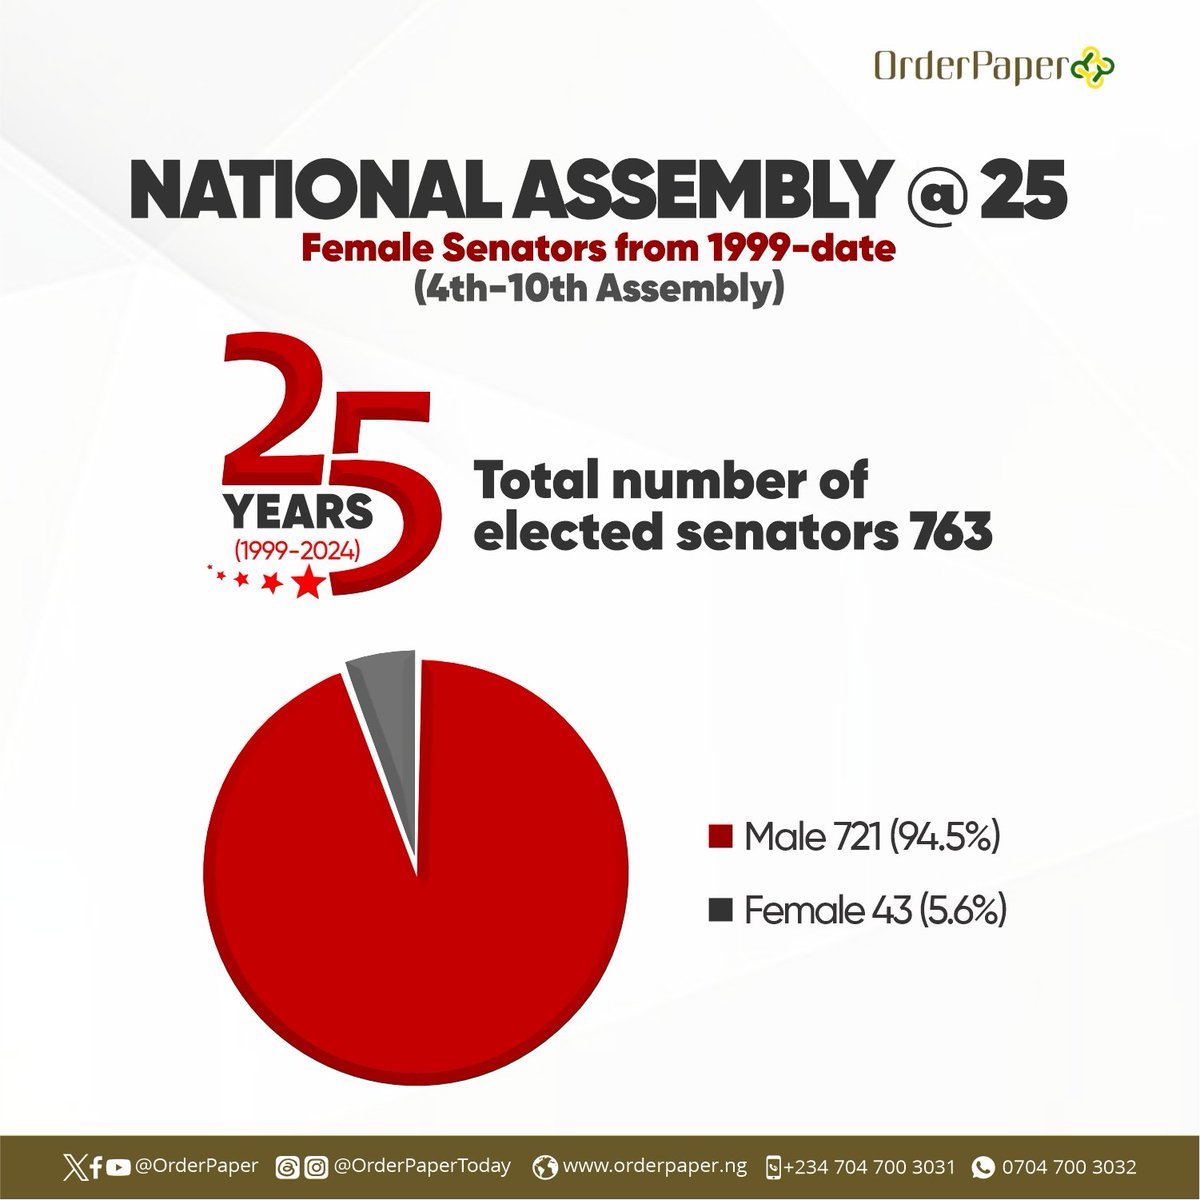 This will shock you😯

What if we told you that since 1999 till date, Nigeria has elected only 43 female senators out of a total number of 763 elected senators.

What could be the underlying causes? Let us know your view in the comment section below

Use the below link to read